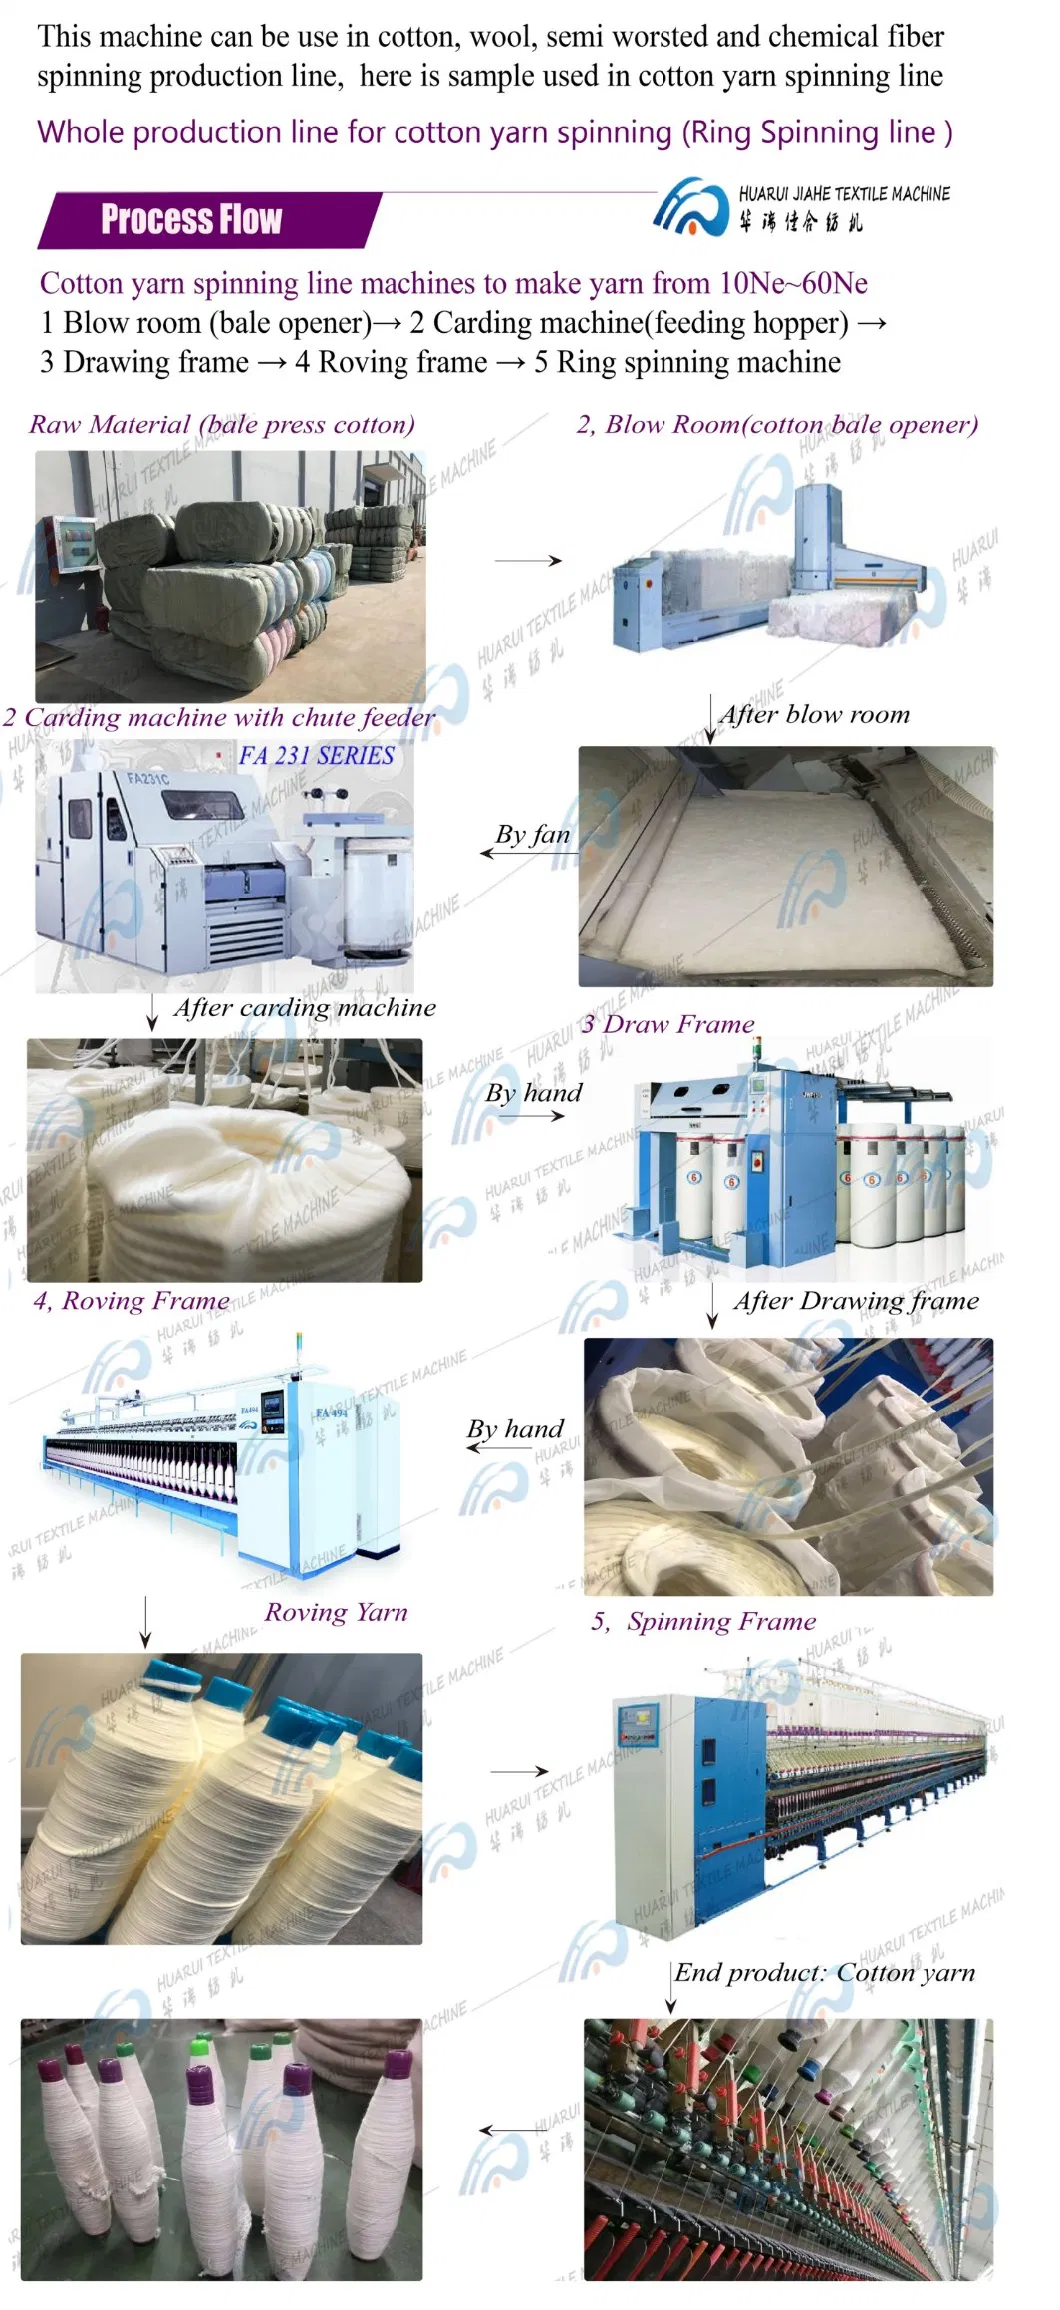 Ht HP Yarn Dyeing Machineyarn Dyeing Machine -Low Water Consuming Textile High Temperature Overflow Dyeing Machine Section Dyed Yarn